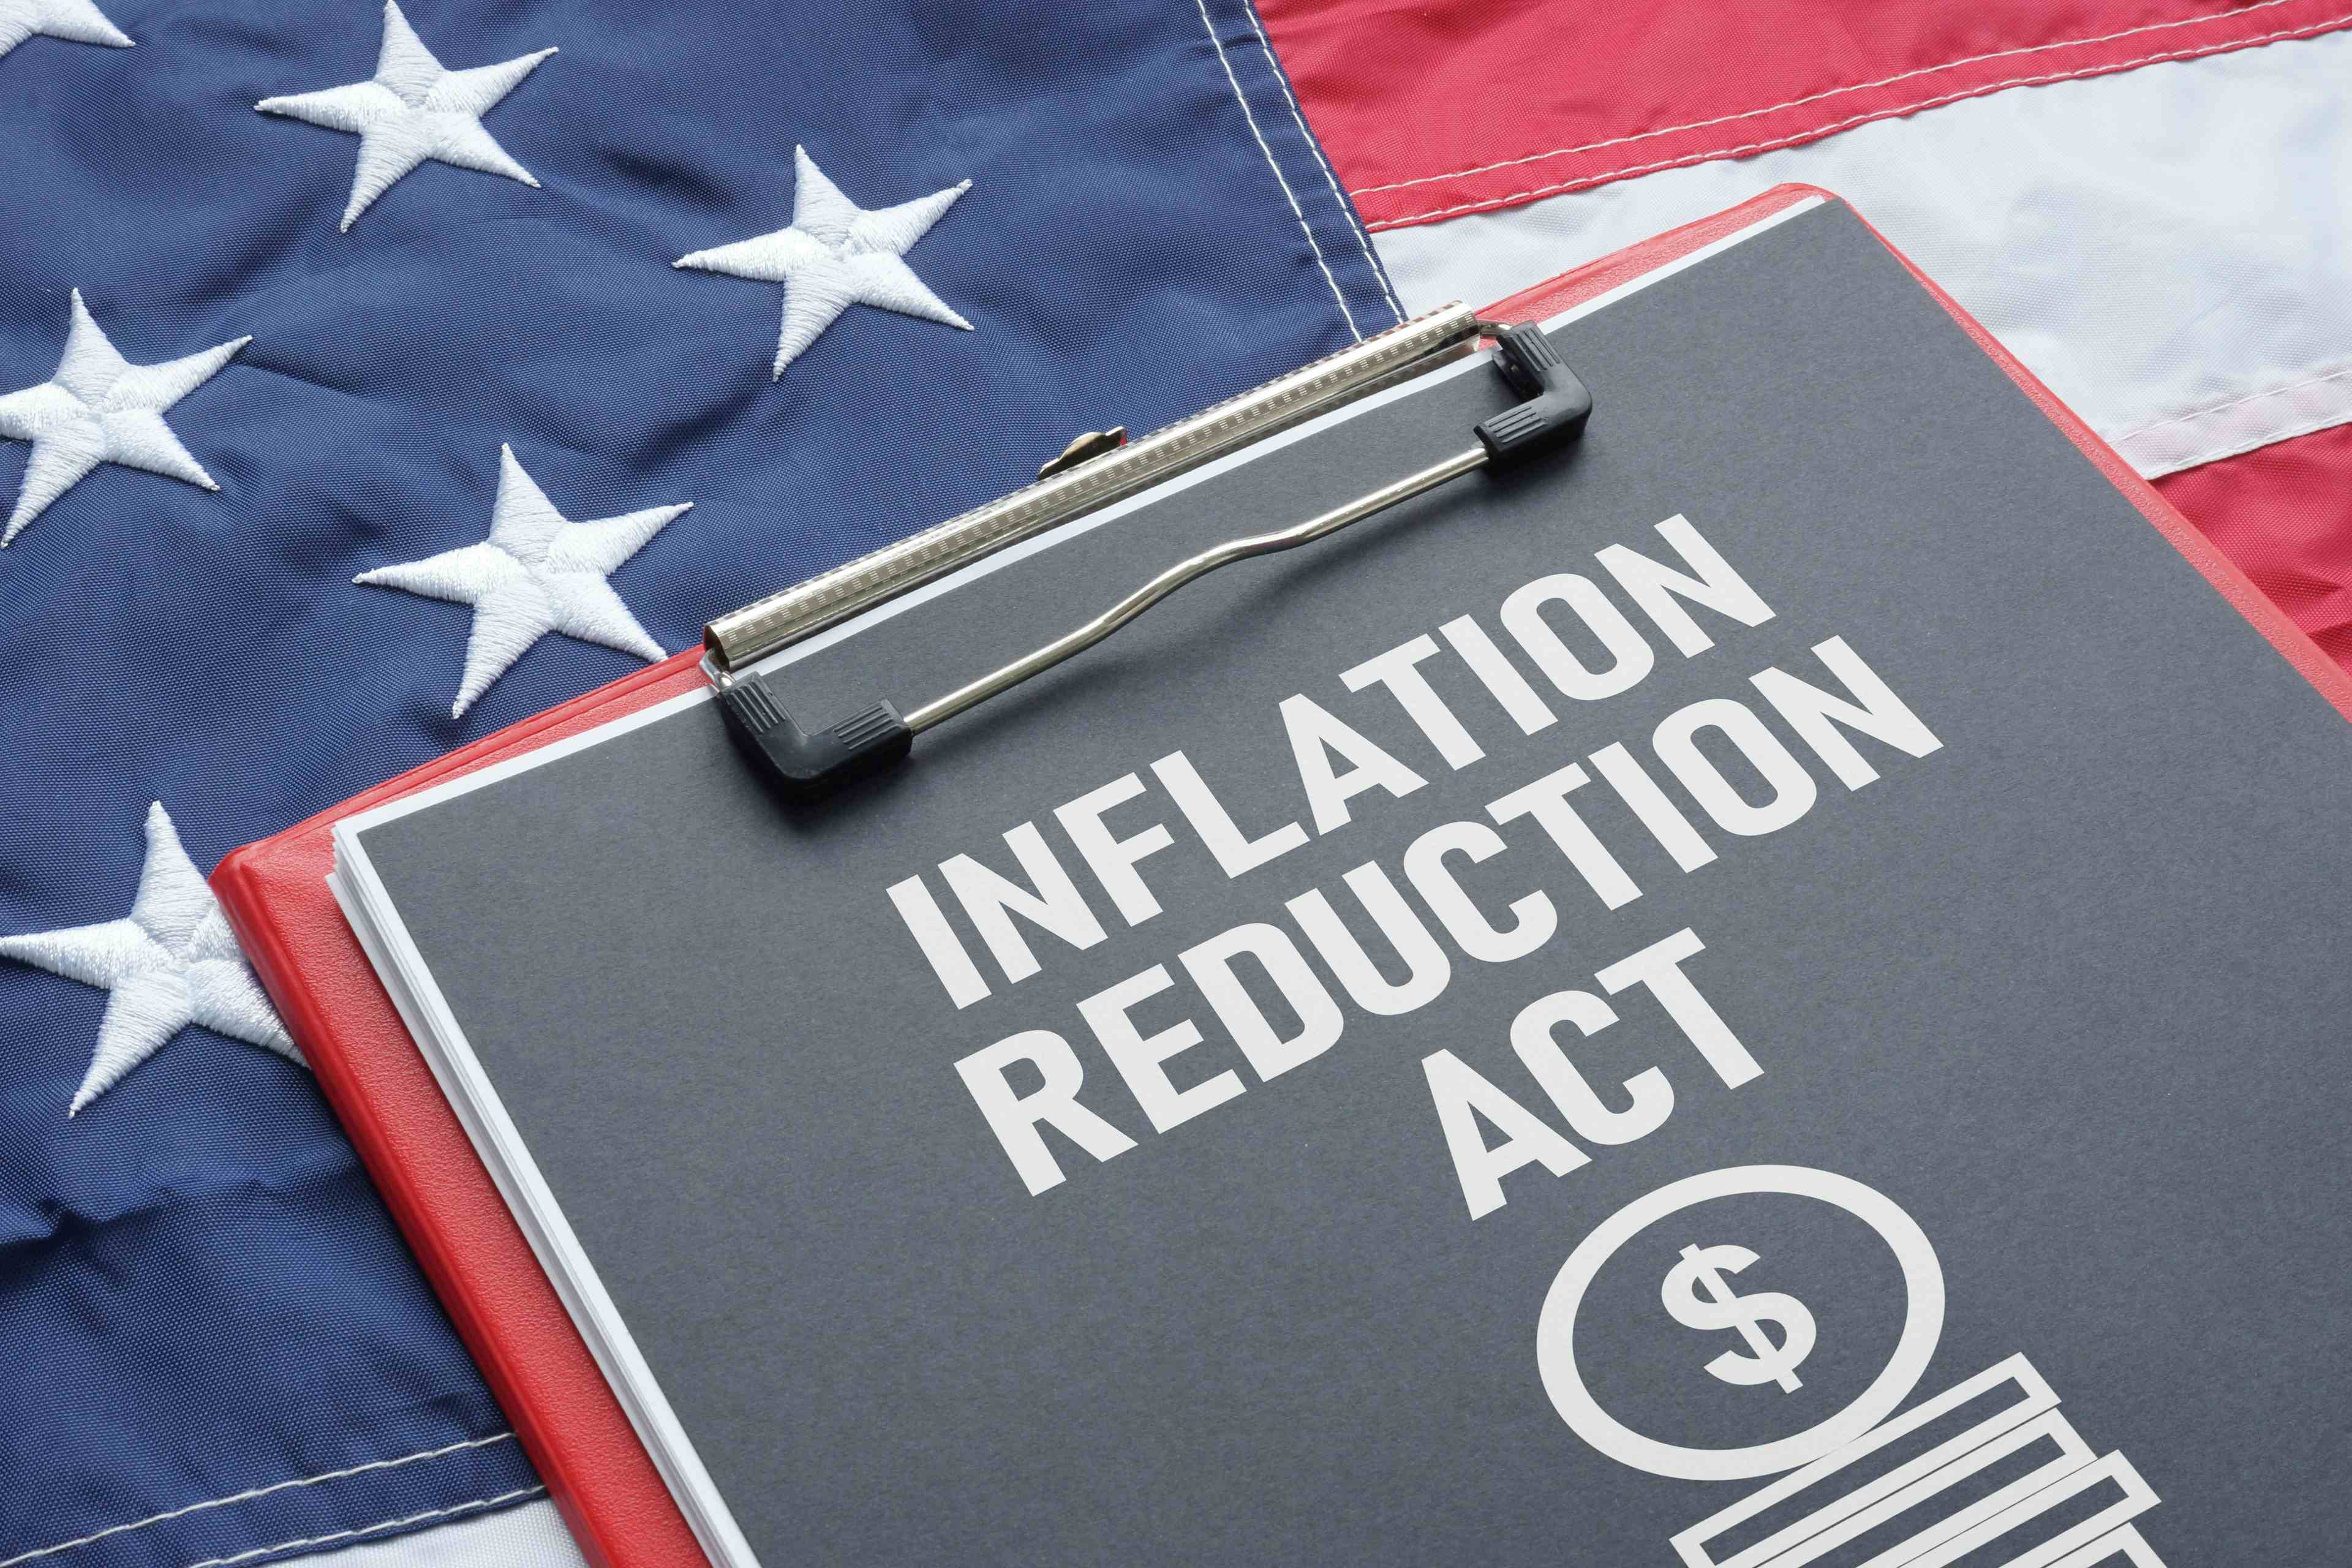 Inflation Reduction Act is shown using the text and the US flag - Image credit: Andrii | stock.adobe.com 